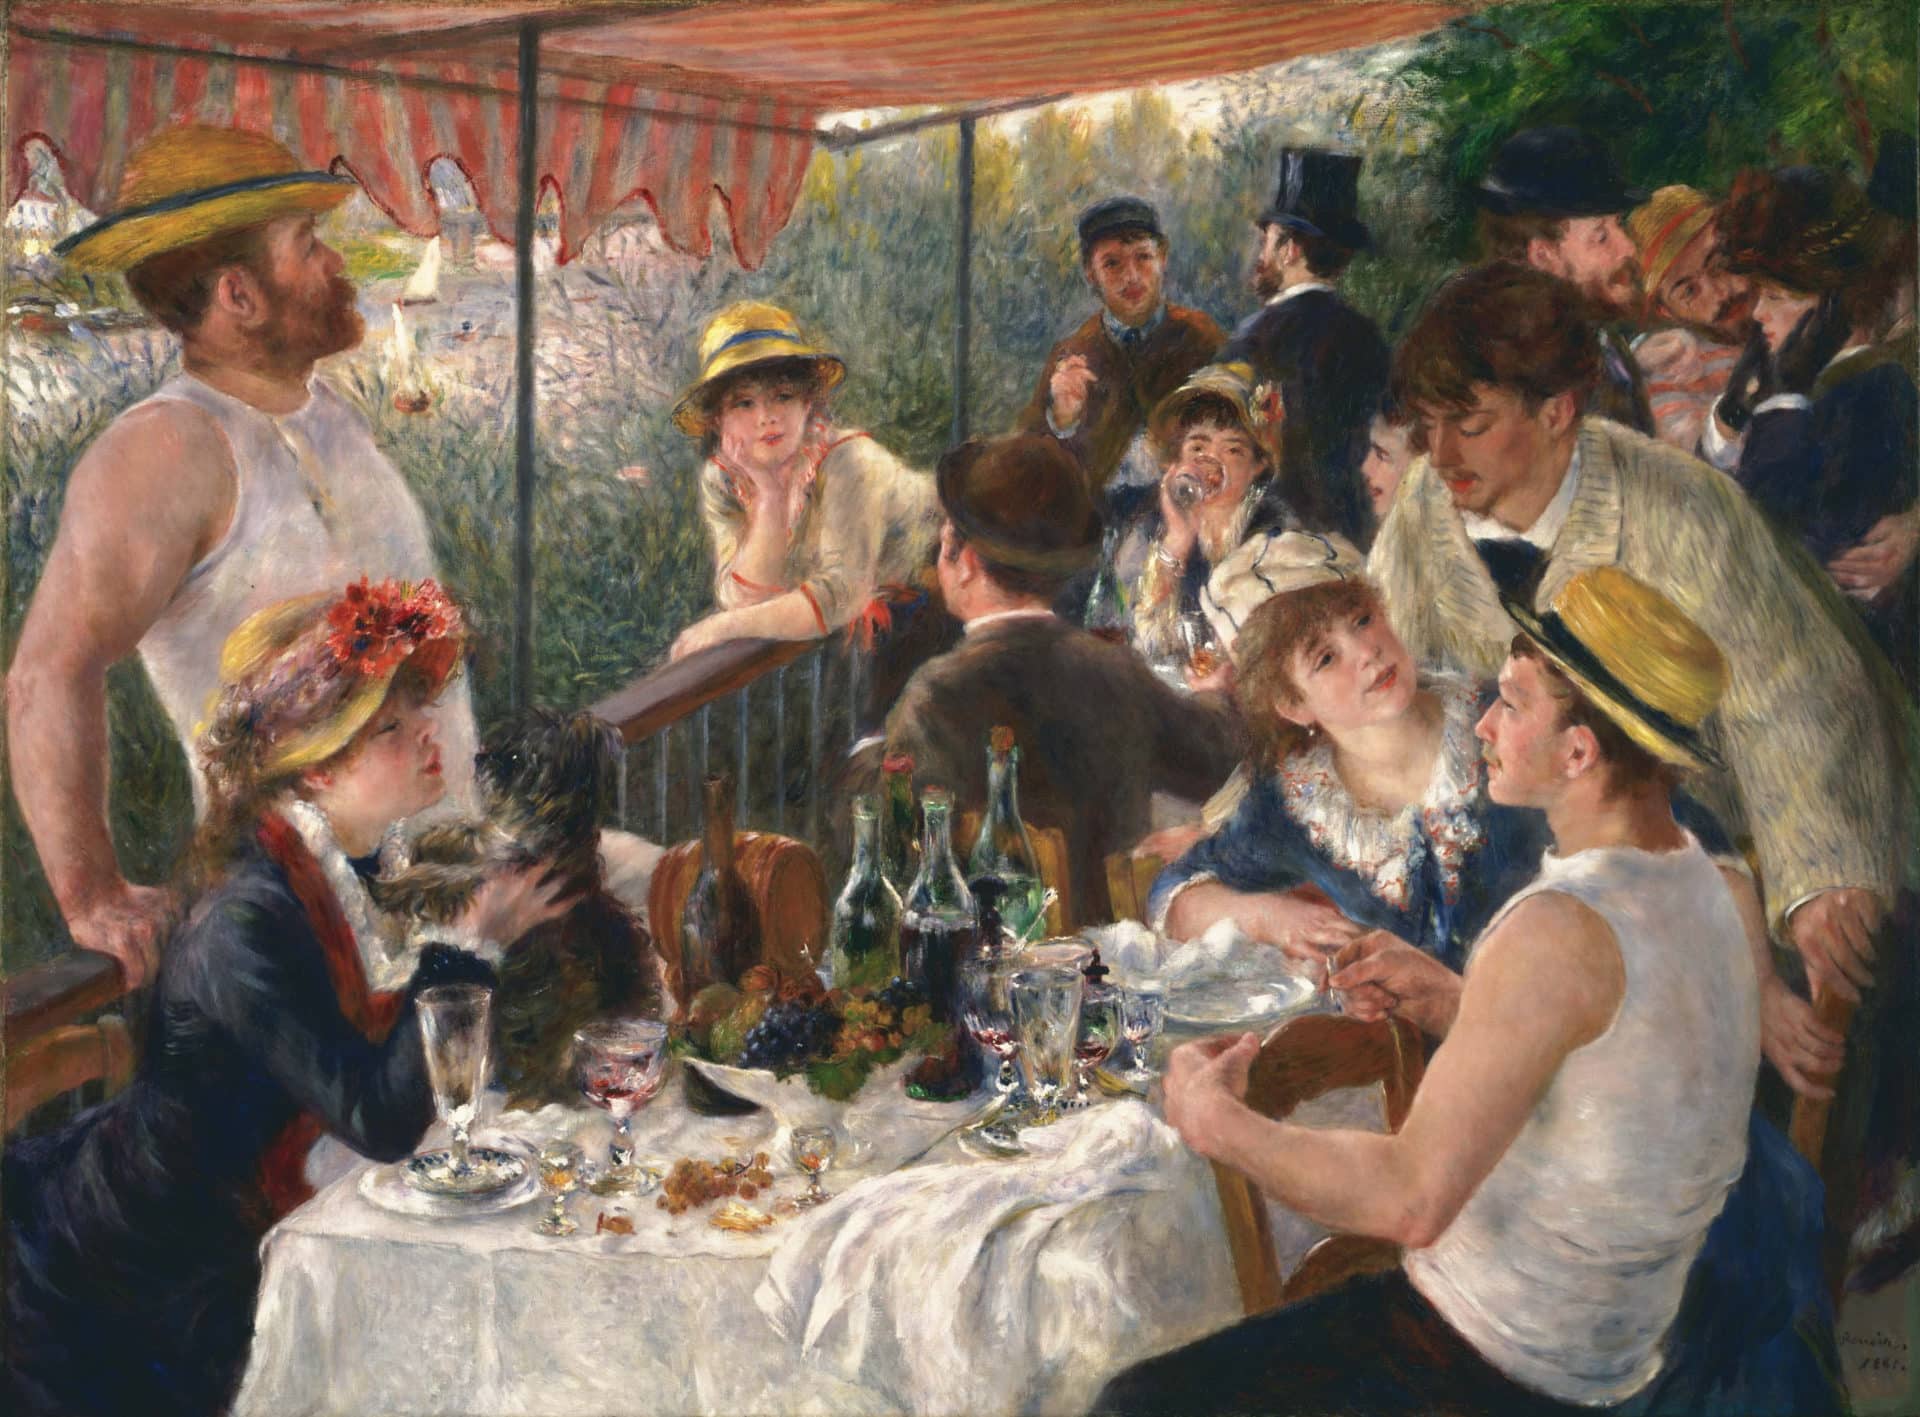 Pierre-Auguste Renoir, Luncheon of the Boating Party (1880-1881). Courtesy of the Phillips Collection, DC.